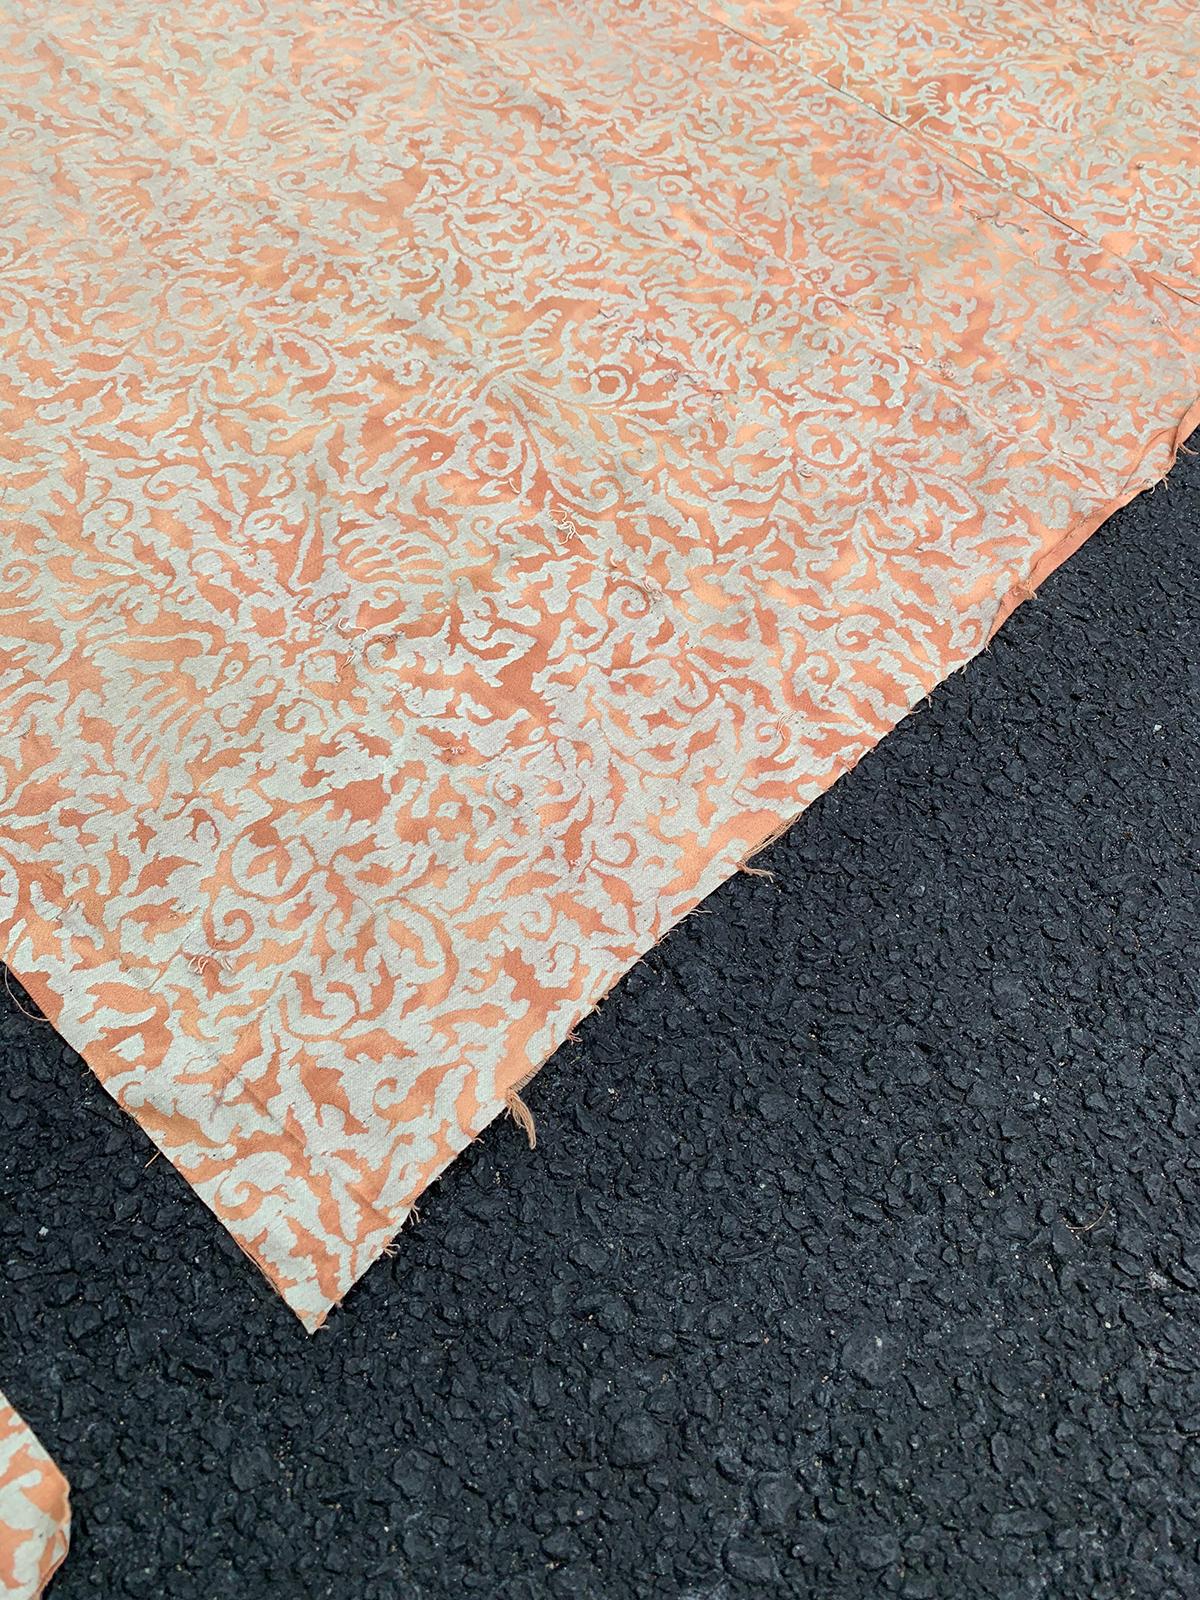 Pair of Mid-20th Century Fortuny Fabric Panels with Custom Seaming 12